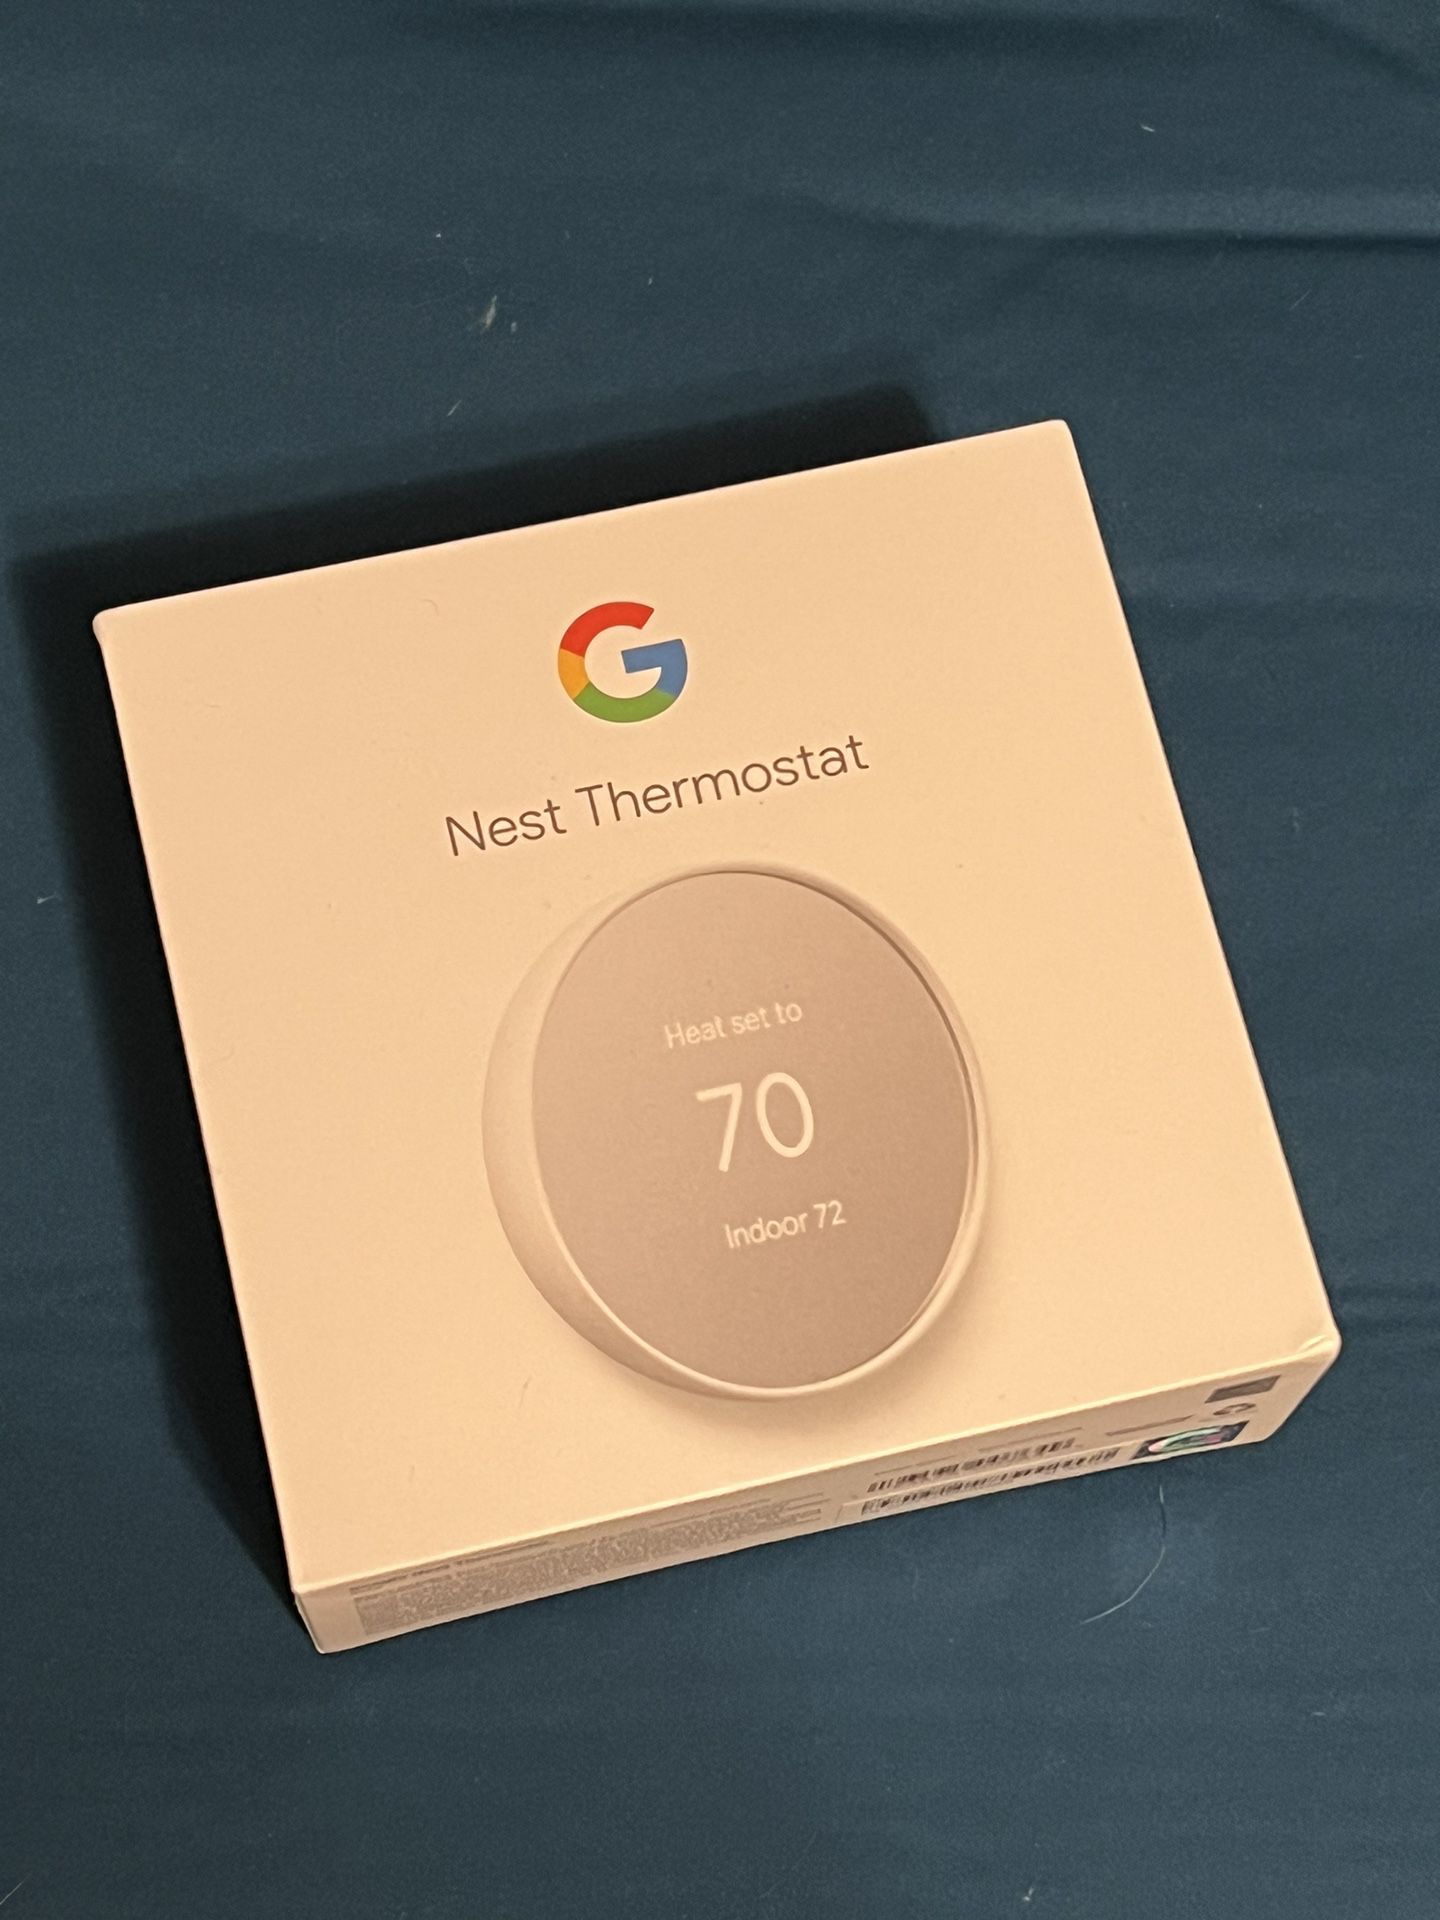 Never Used - Google Nest Thermostat - Smart Thermostat for Home - Programmable Wifi Thermostat - Snow